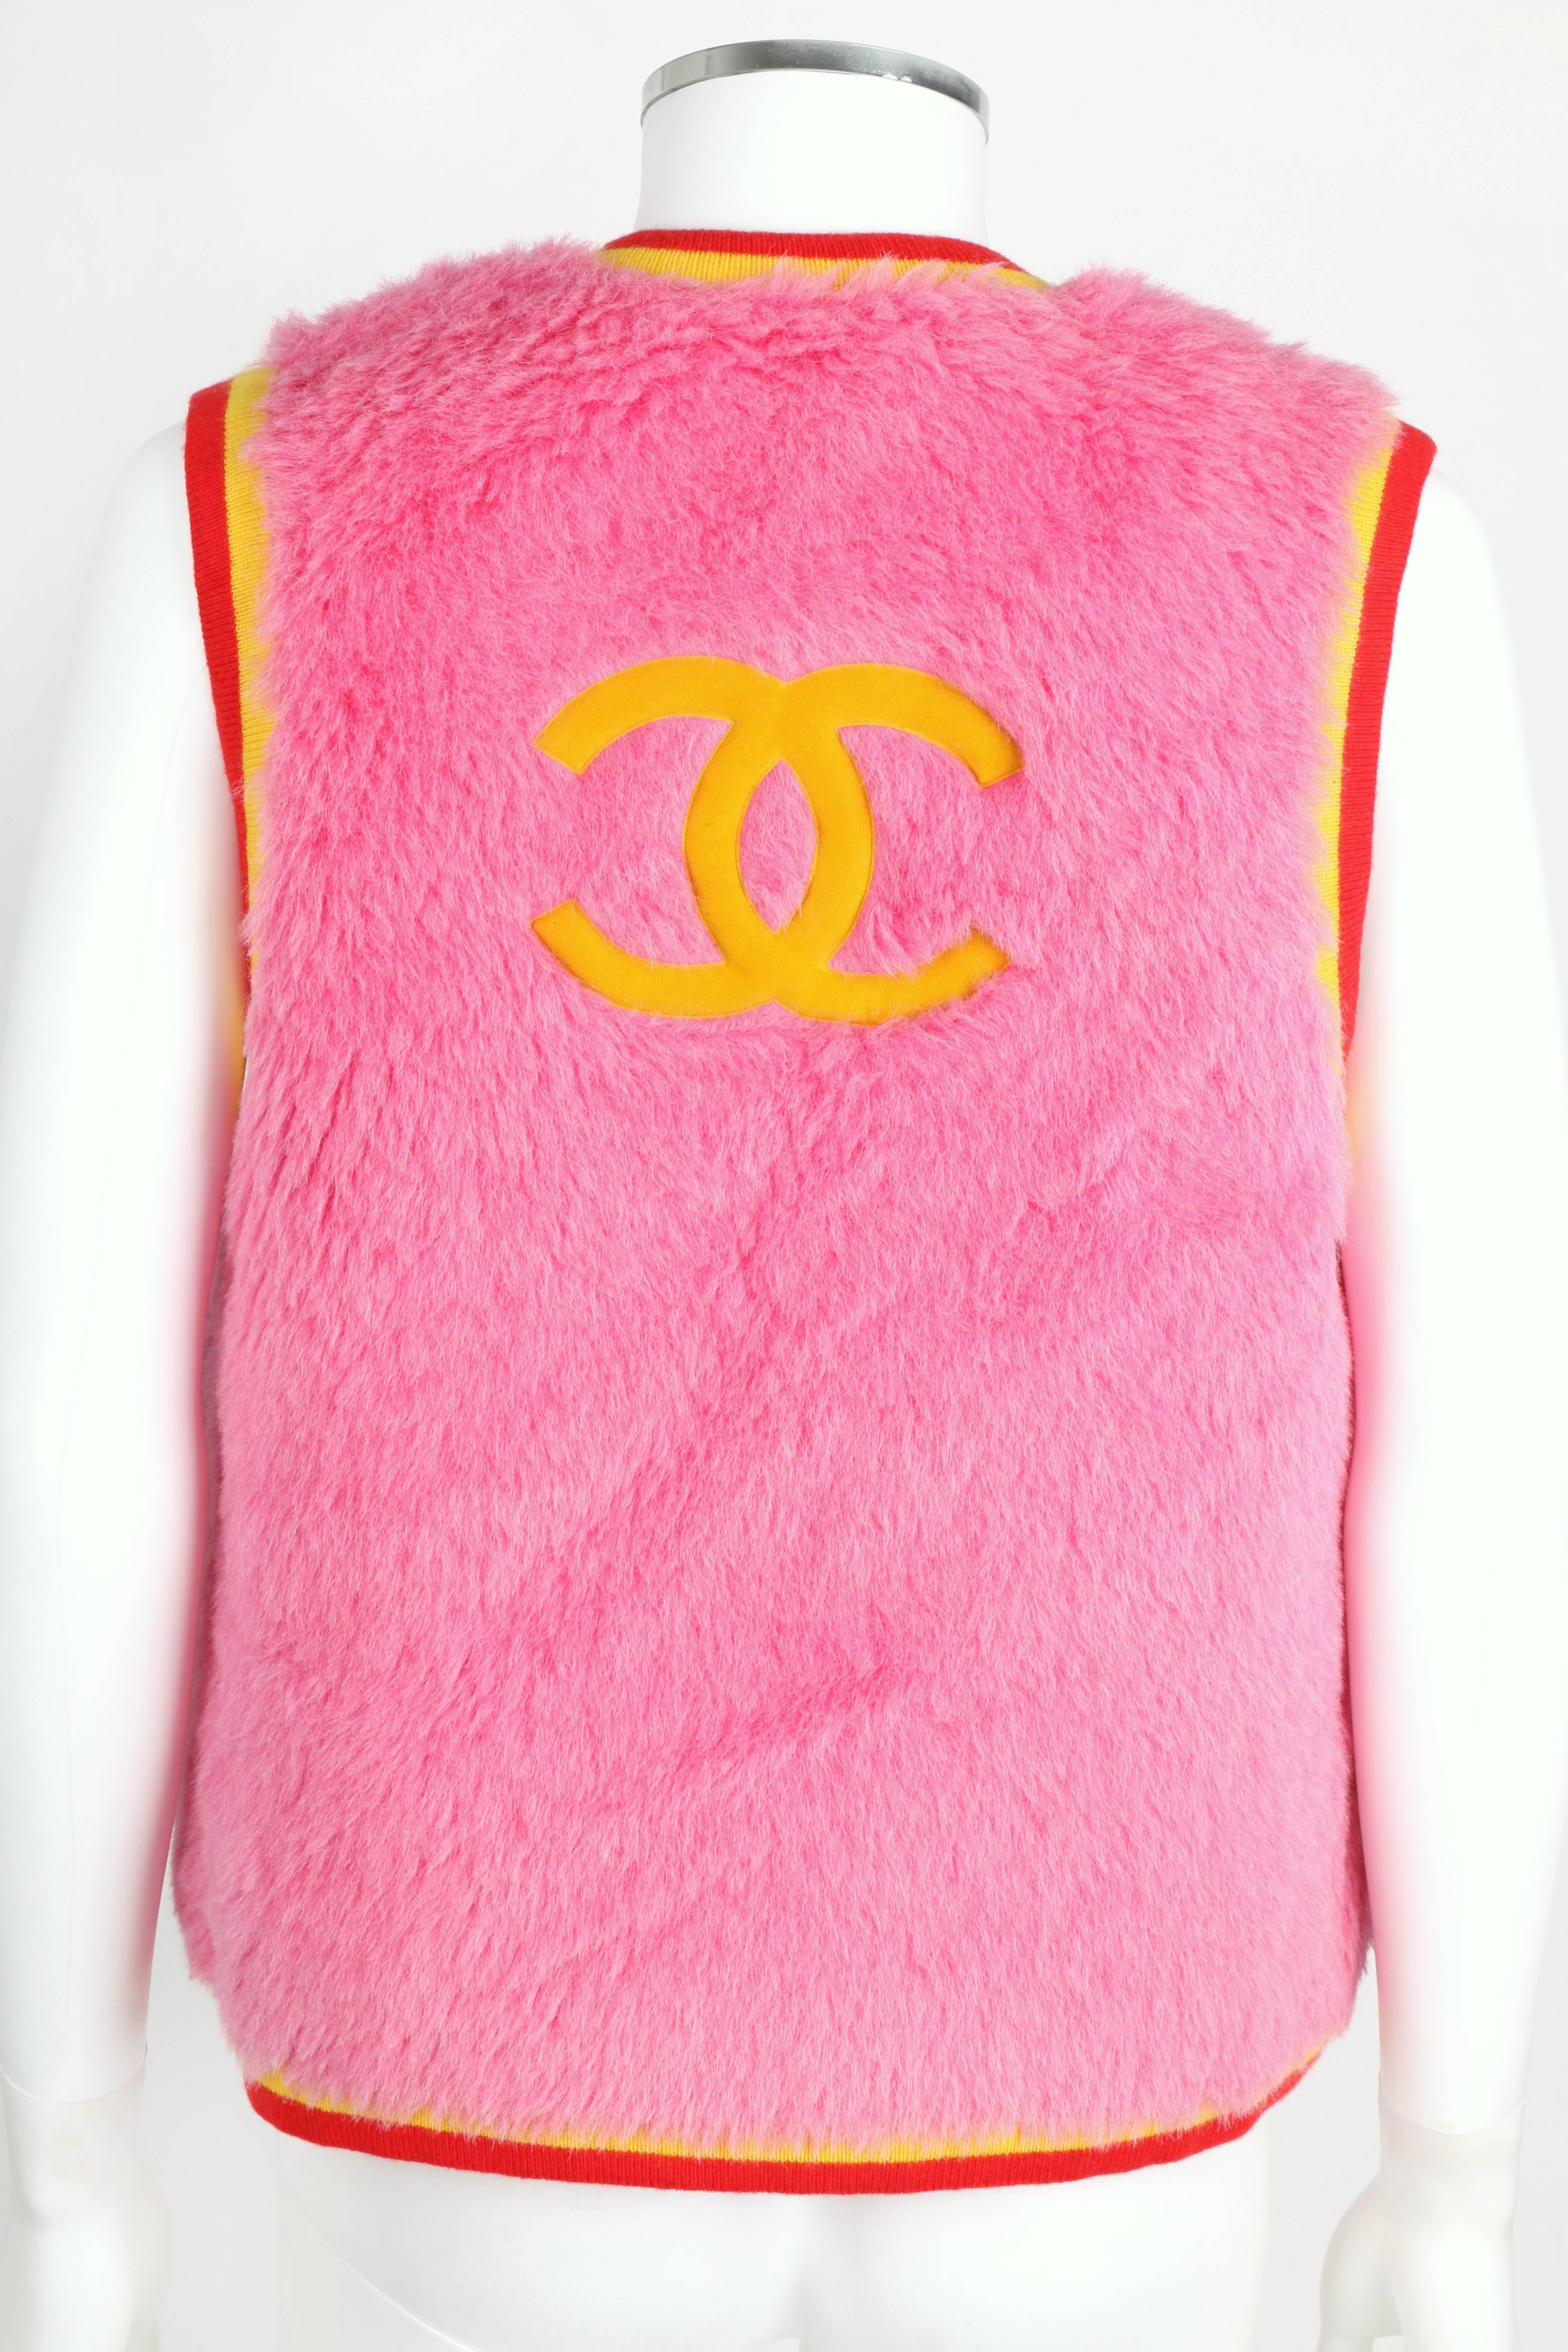 Rare Chanel bubblegum pink furry alpaca blend vest from the Autumn-Winter 1994 collection.  Vest is trimmed in bright yellow and red cashmere knit.  Four small pockets at front.  Large velveteen 